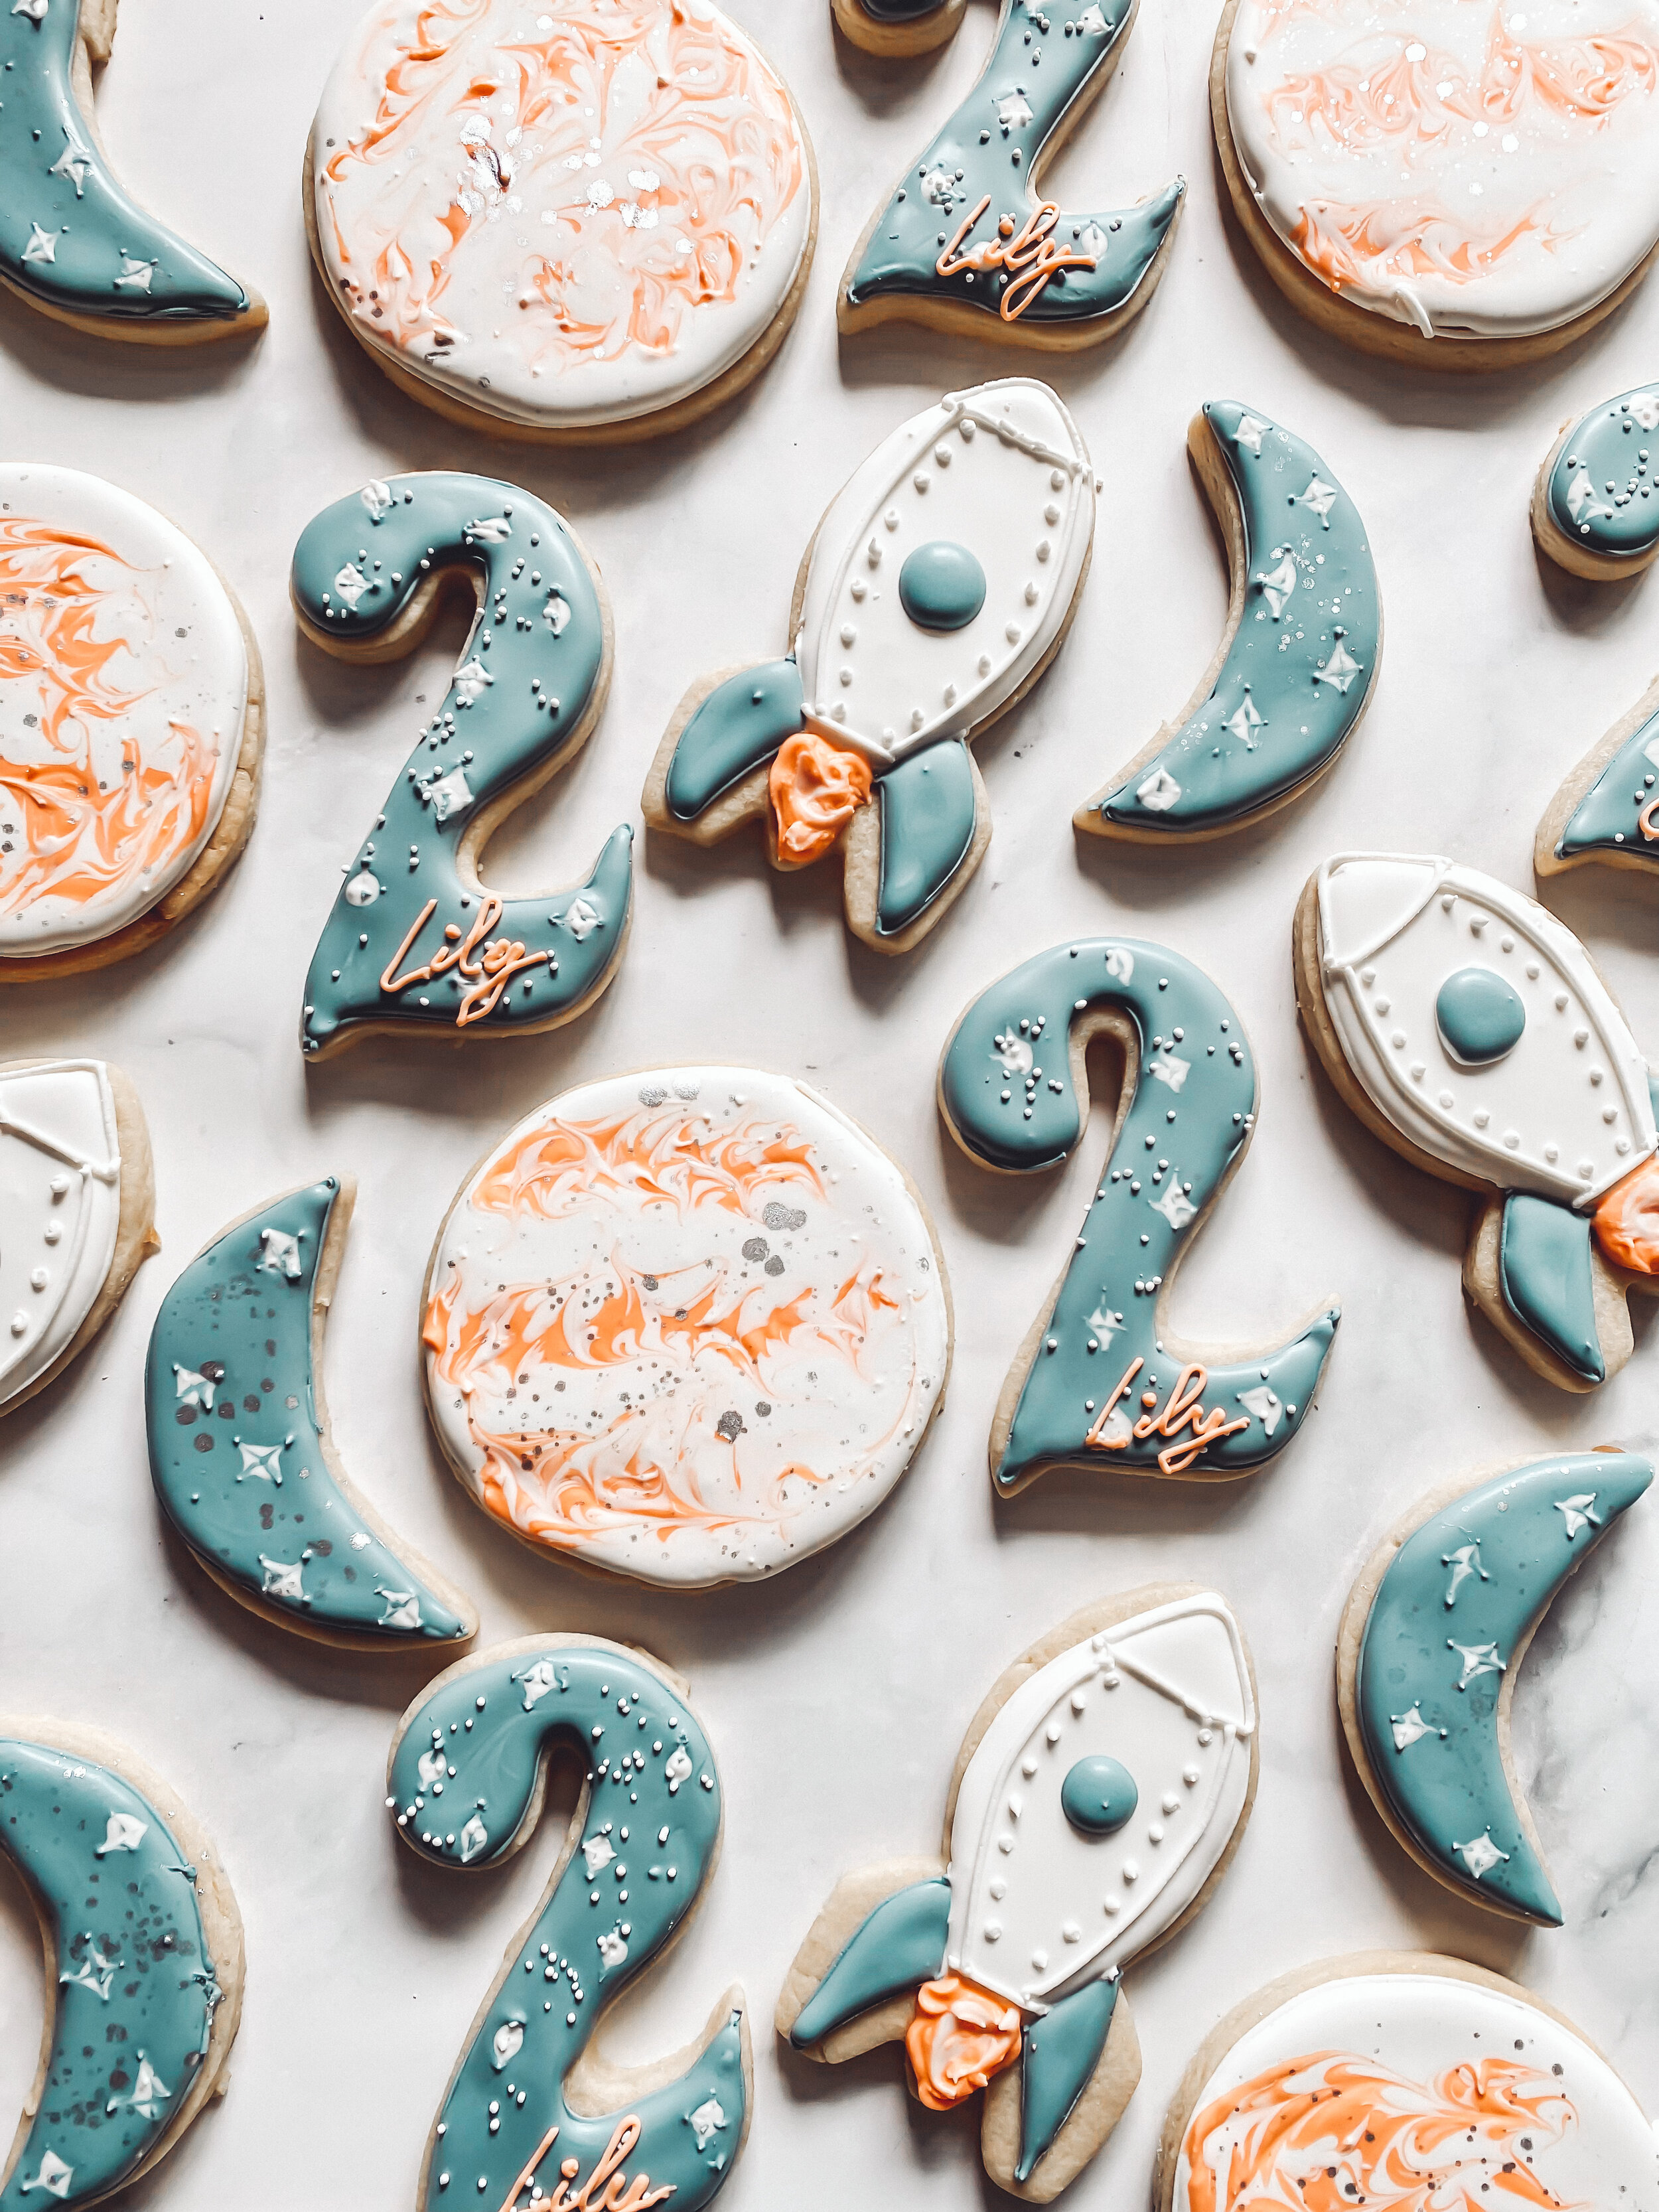  Space-Themed Second Birthday Cookies 